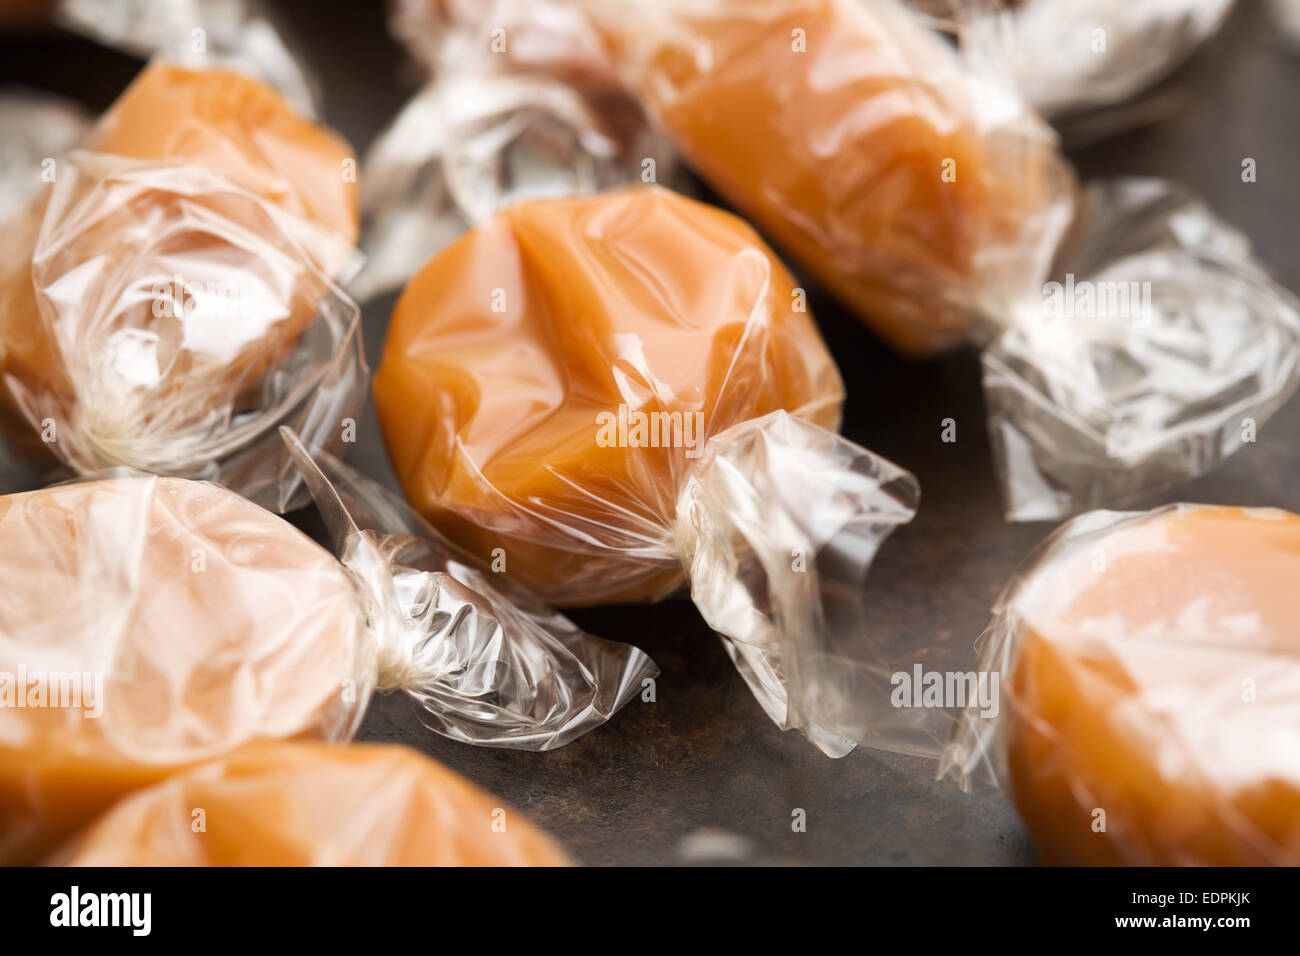 cellophane wrapped chewy dairy toffees Stock Photo